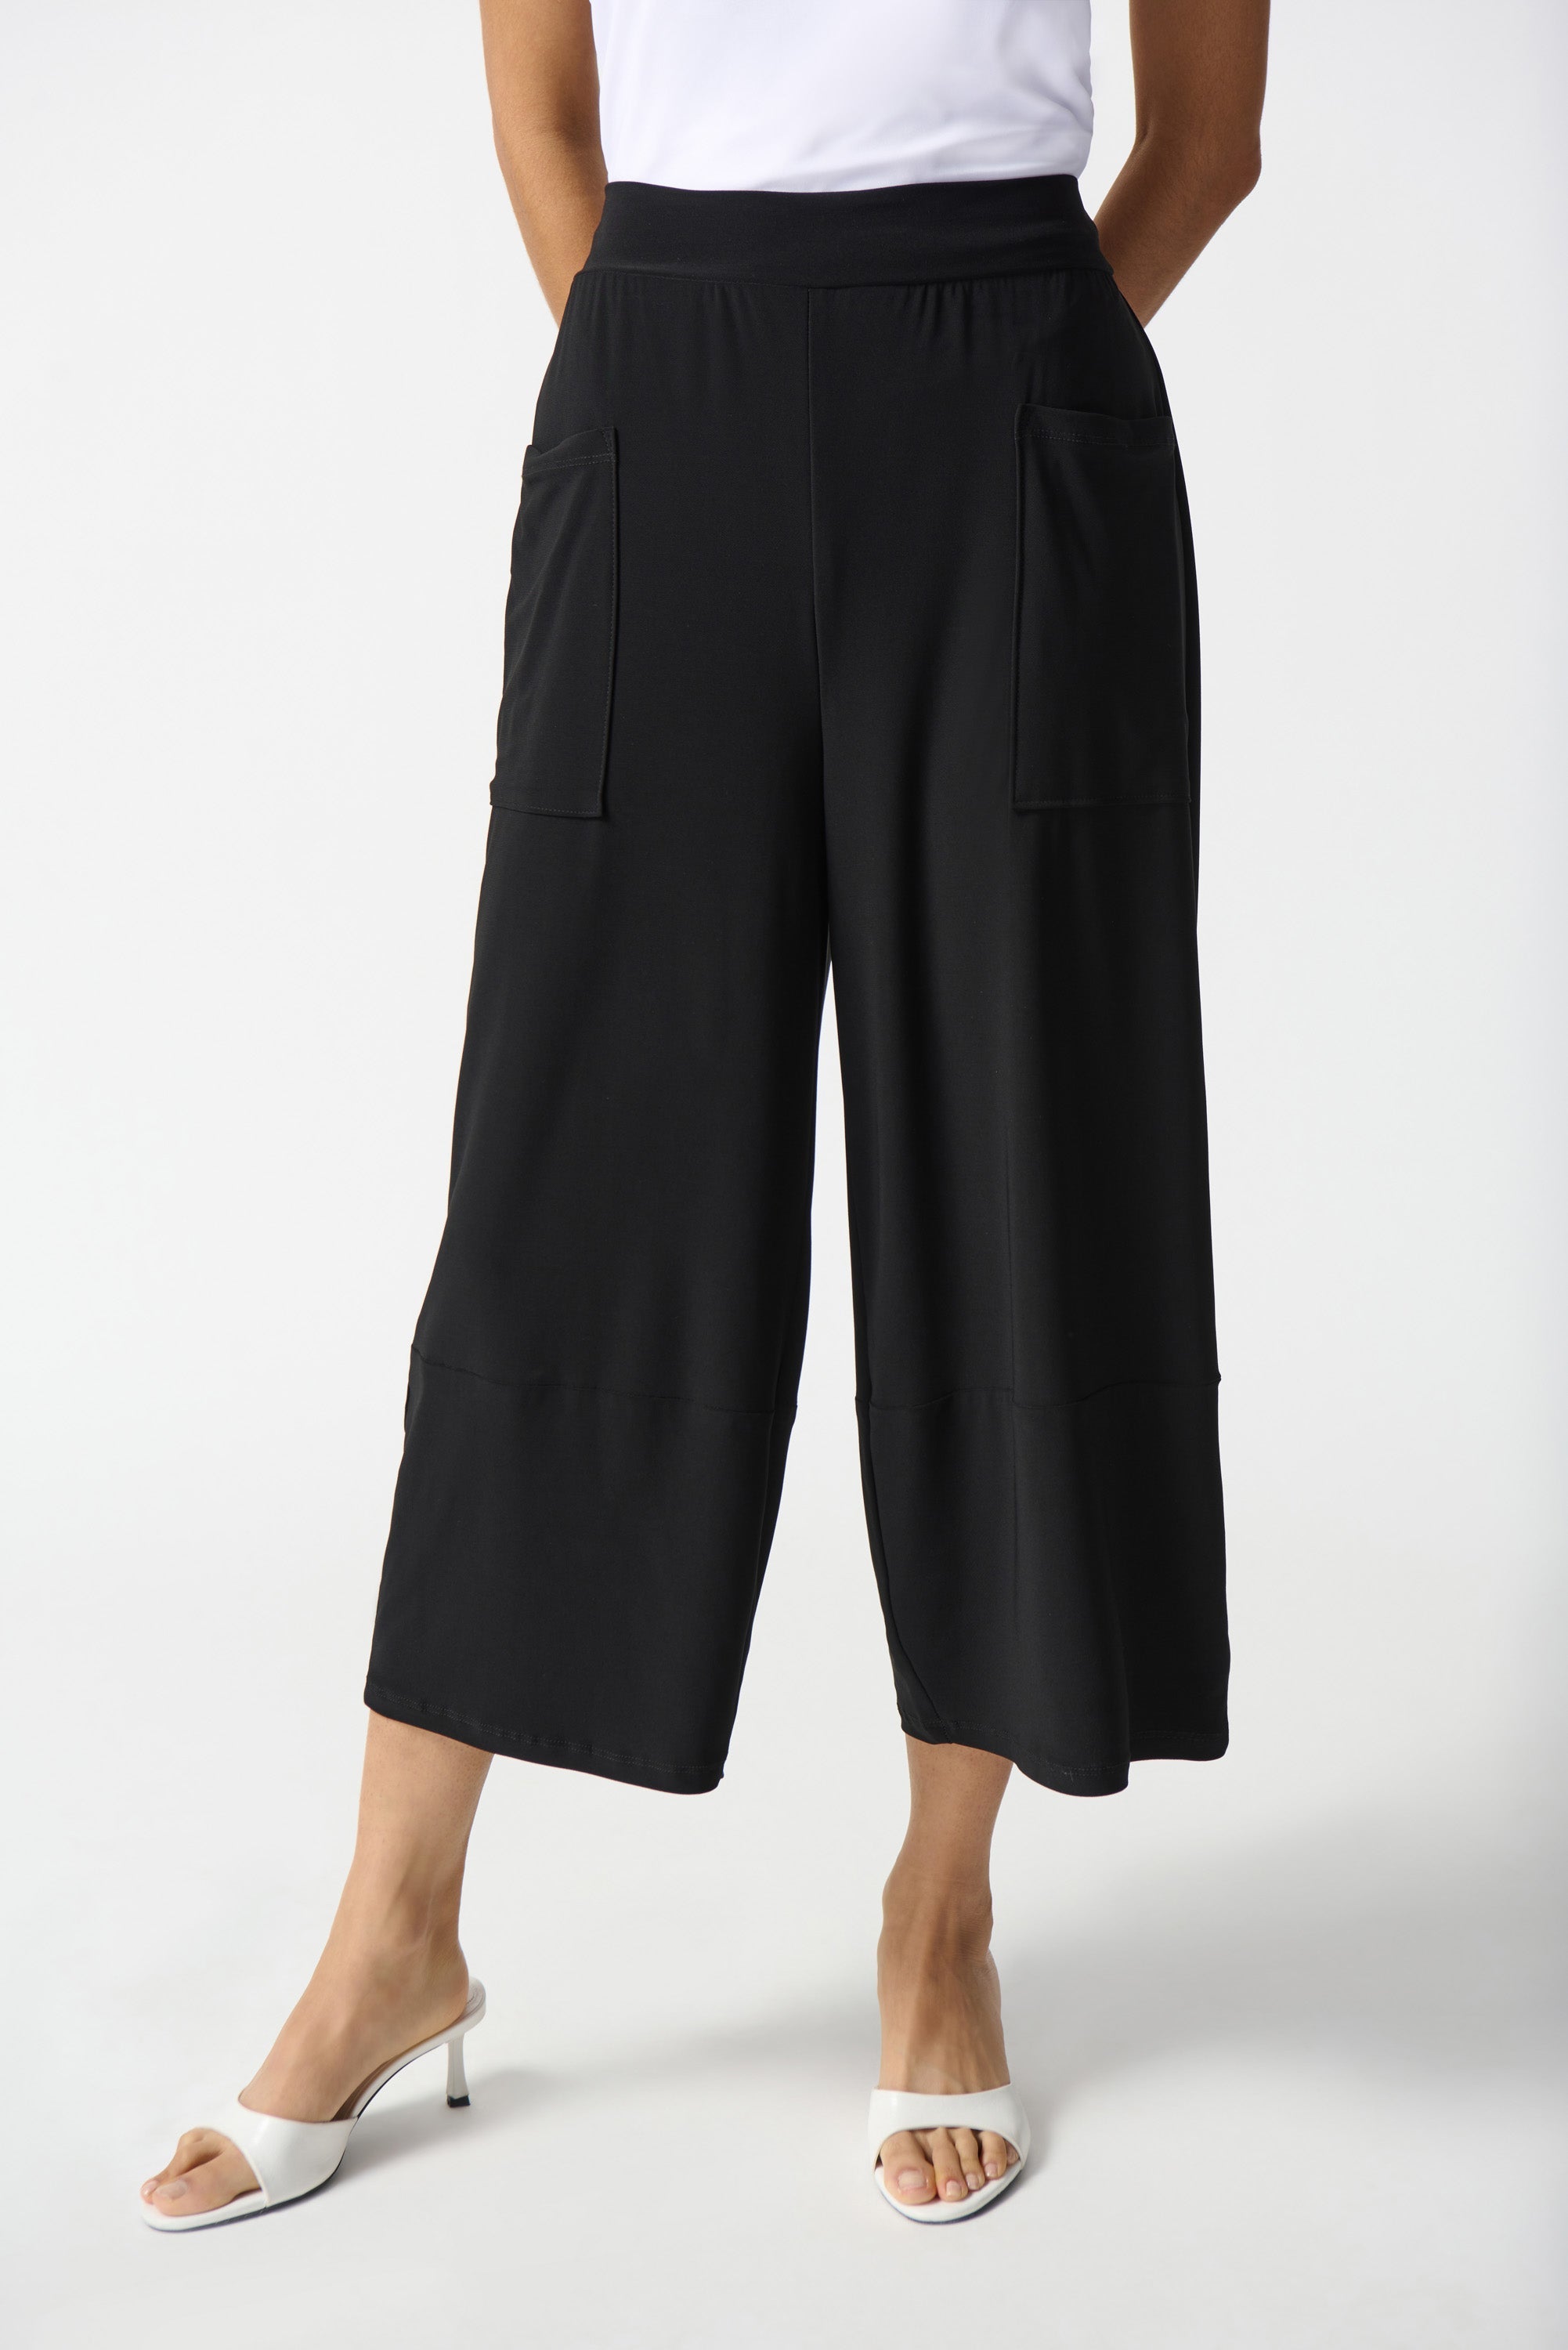 Joseph Ribkoff (242104) Women's Silky Knit Culotte Pants with Soft Contour Waistband - Cropped Wide Leg Fit in Black